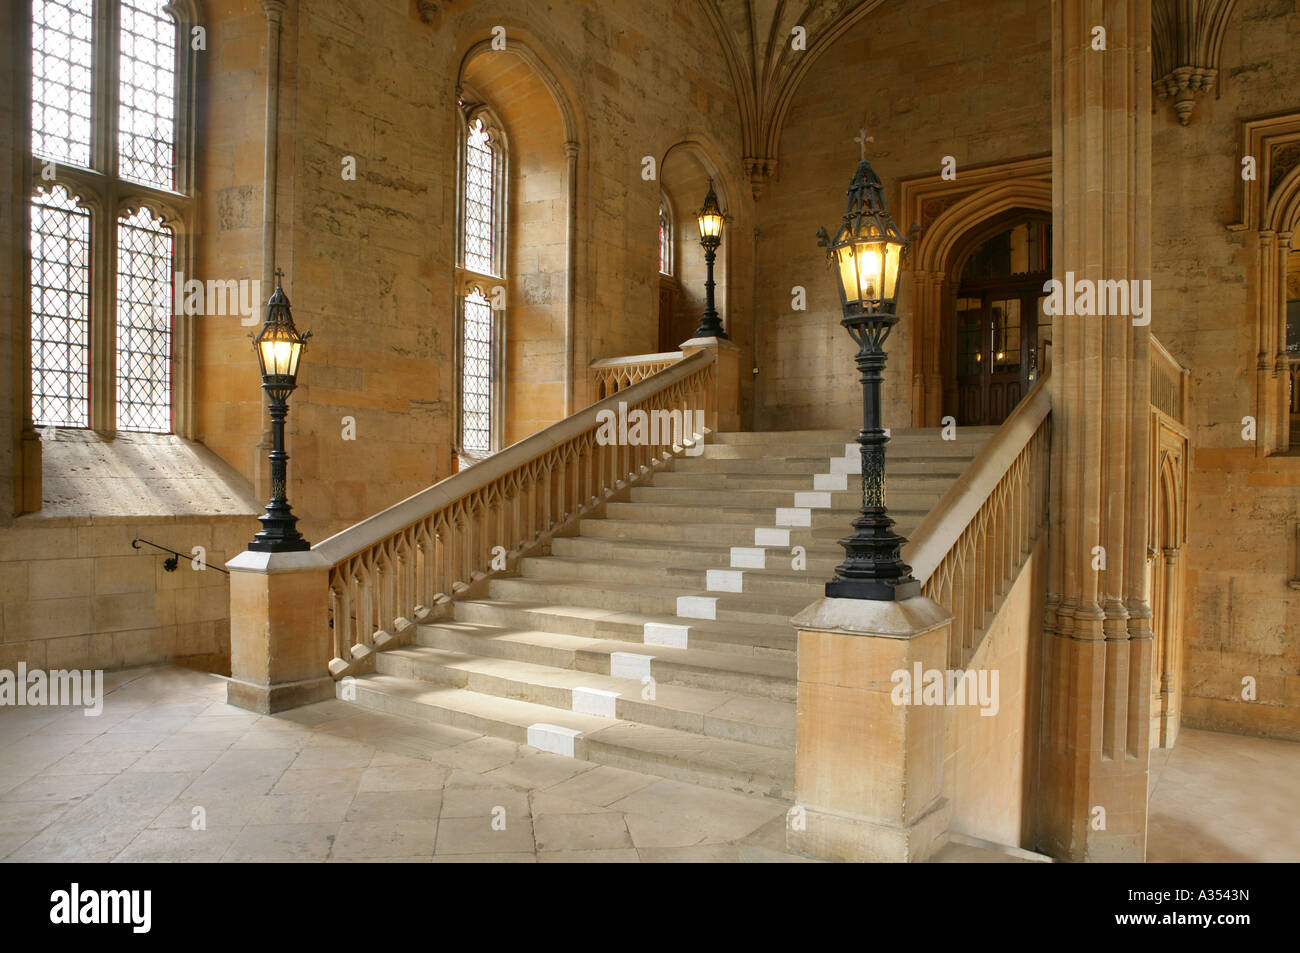 Staircase at christchurch college oxford leading to the great hall. Stock Photo